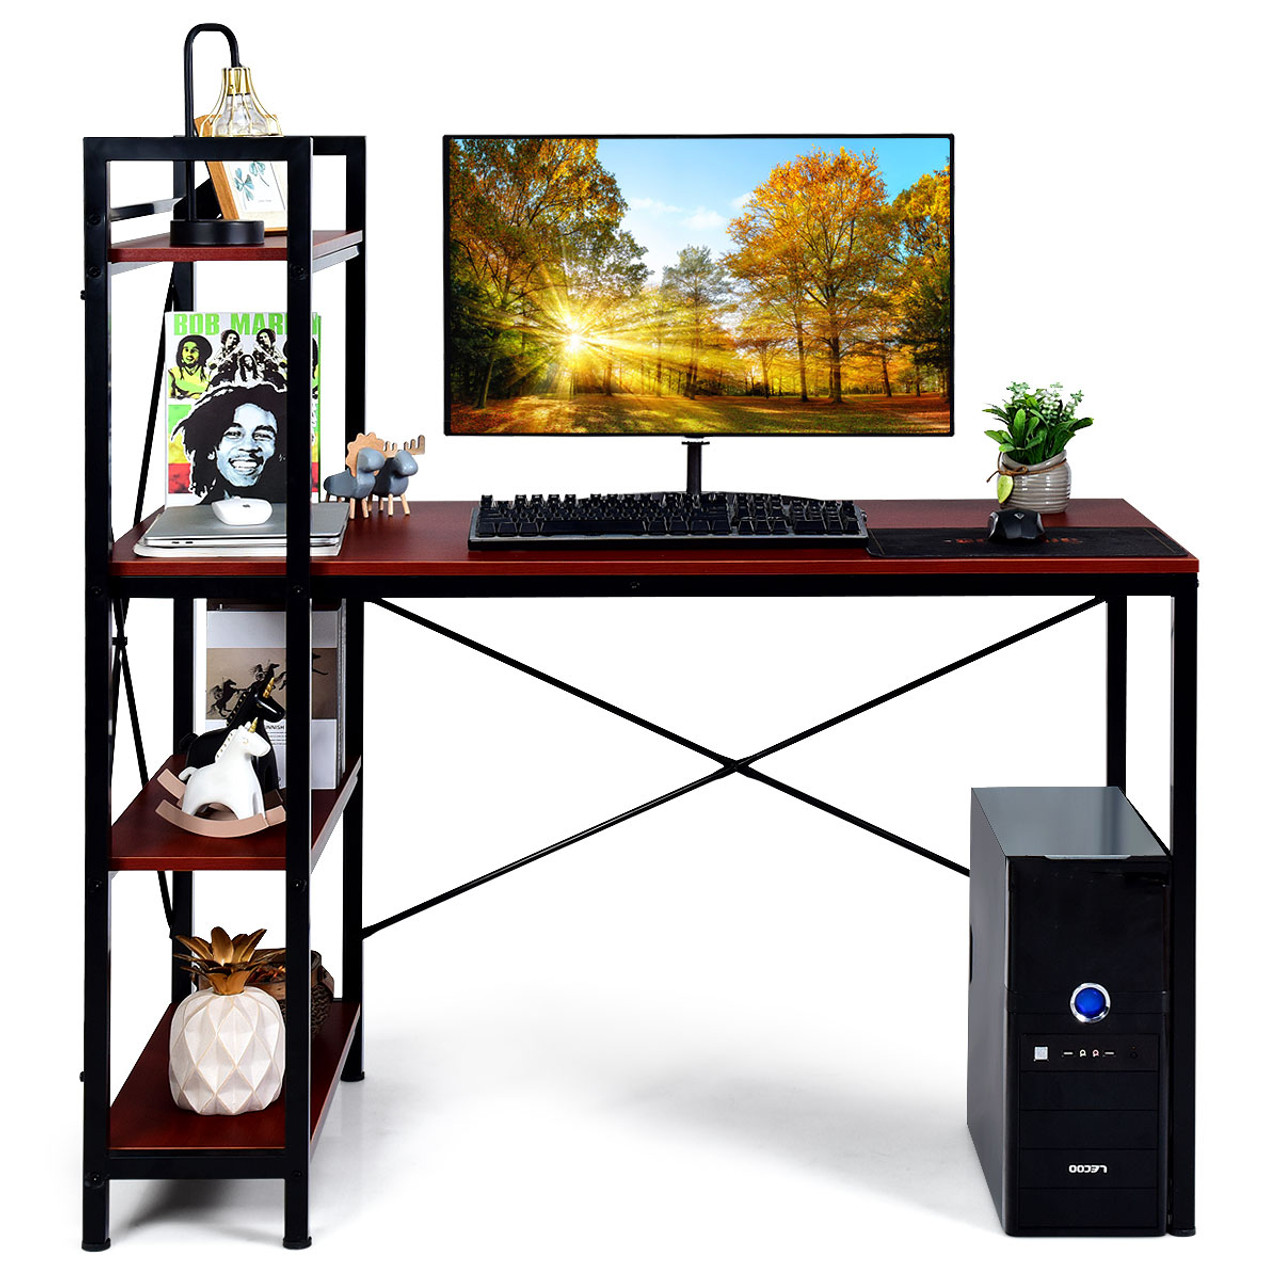 Costway 47.5'' Compact Computer Desk with 4-Tier Storage product image